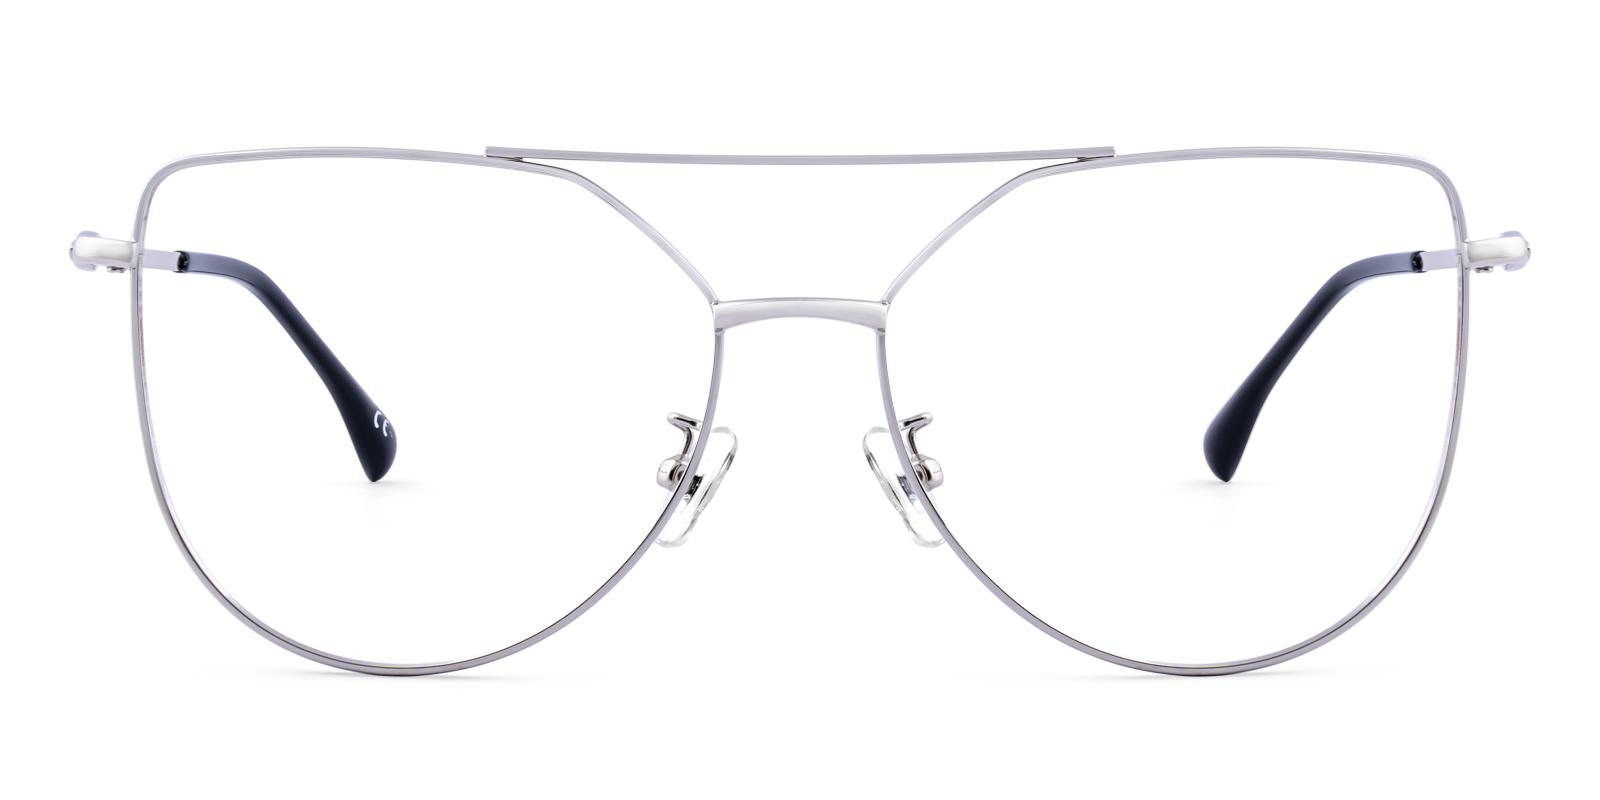 Opoit Silver Metal Eyeglasses , NosePads Frames from ABBE Glasses